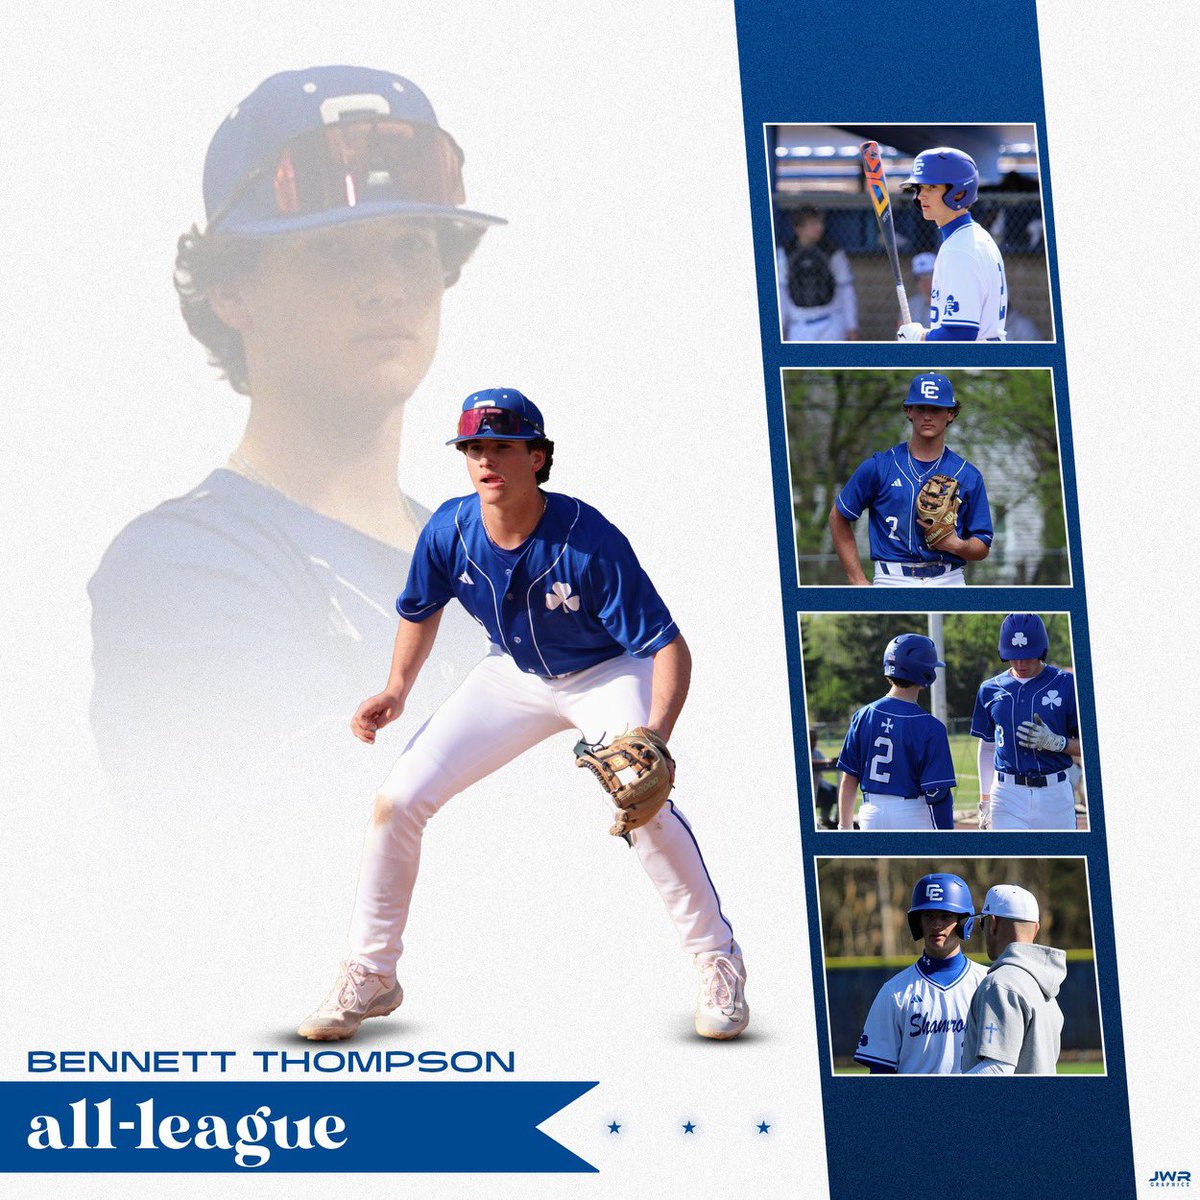 Congratulations @Bennett_T2 earning All-League! The sophomore 2B has tallied a .333 batting average in league play, while playing a stellar second base. He has chipped in 3 doubles and 8 RBI. Proud of you Bennett! Great job!!!